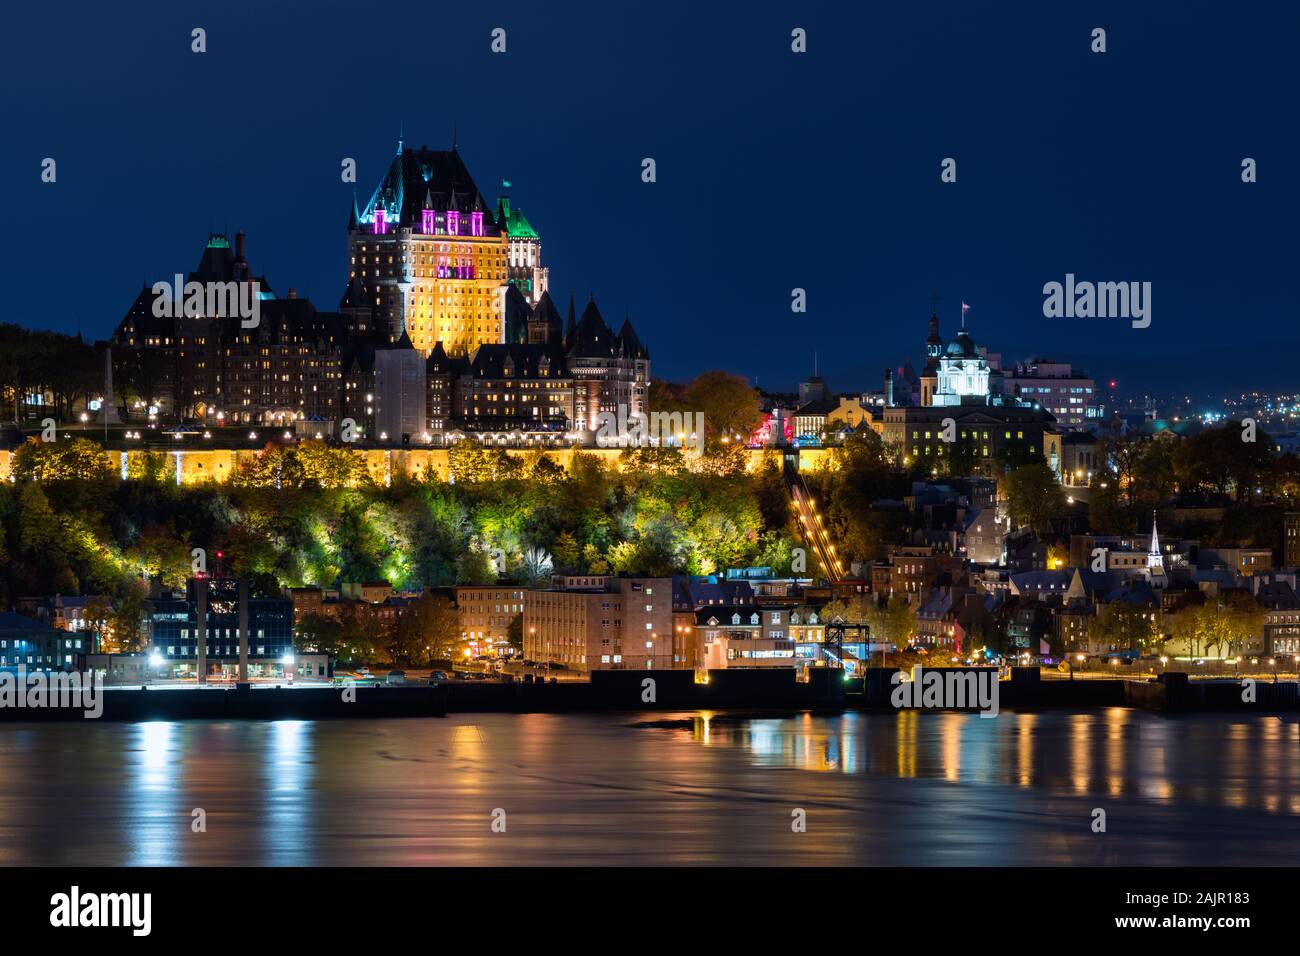 Frontenac Castle in Old Quebec City in the evening during autumn season in Quebec, Canada. Stock Photo